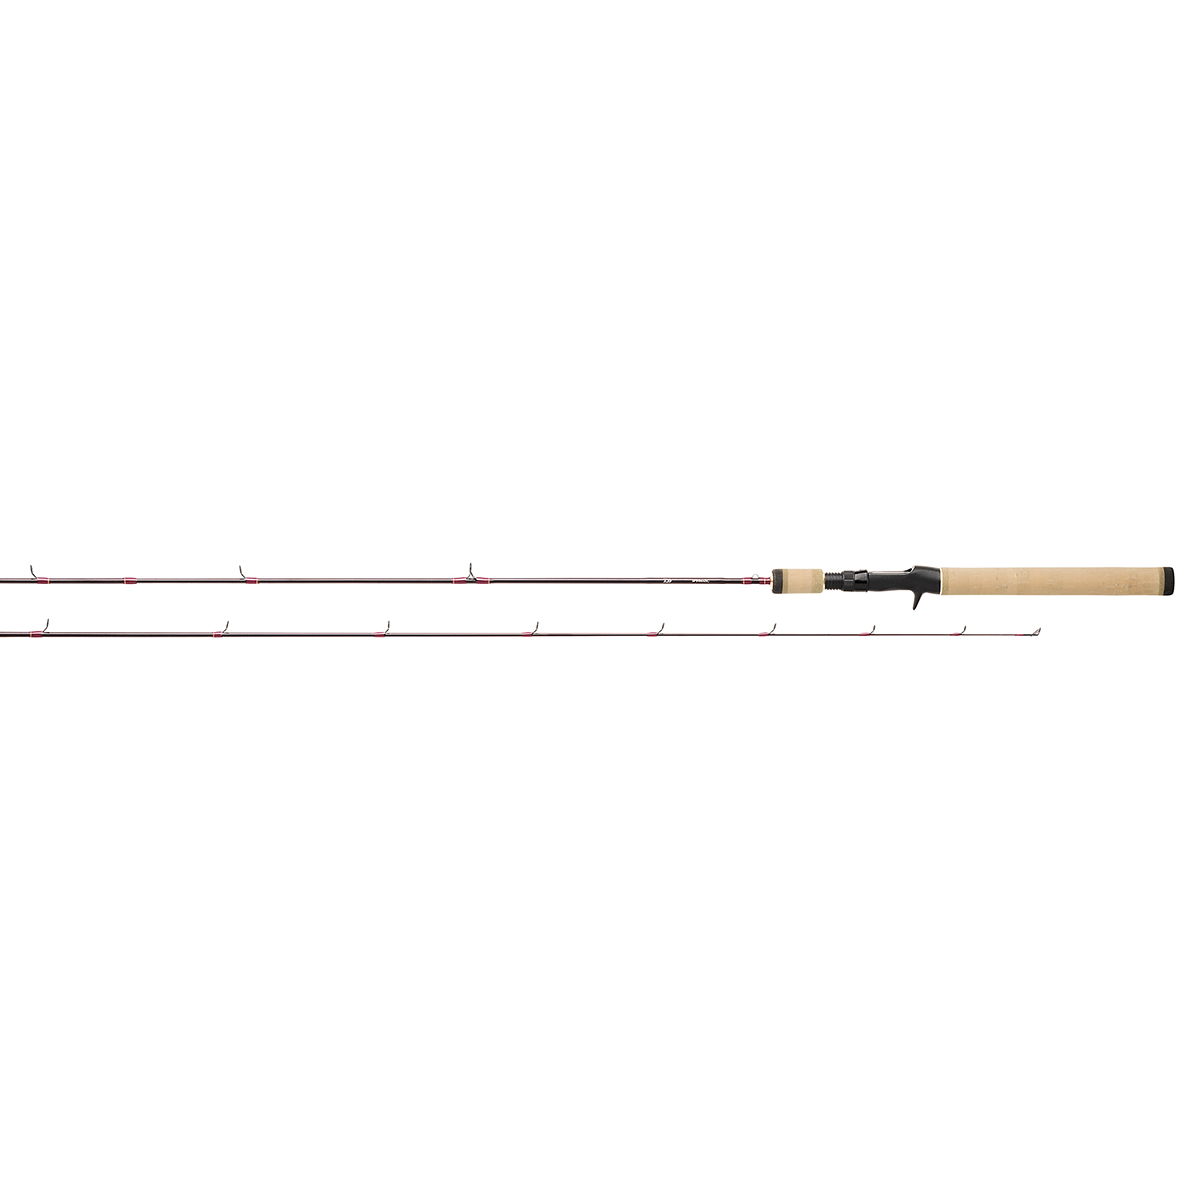  Daiwa Rods Spinning SMD602ULFS Spinmatic Graphiteultralight  Rod 6', 2pc, Cork Handle,Brown : Sports & Outdoors